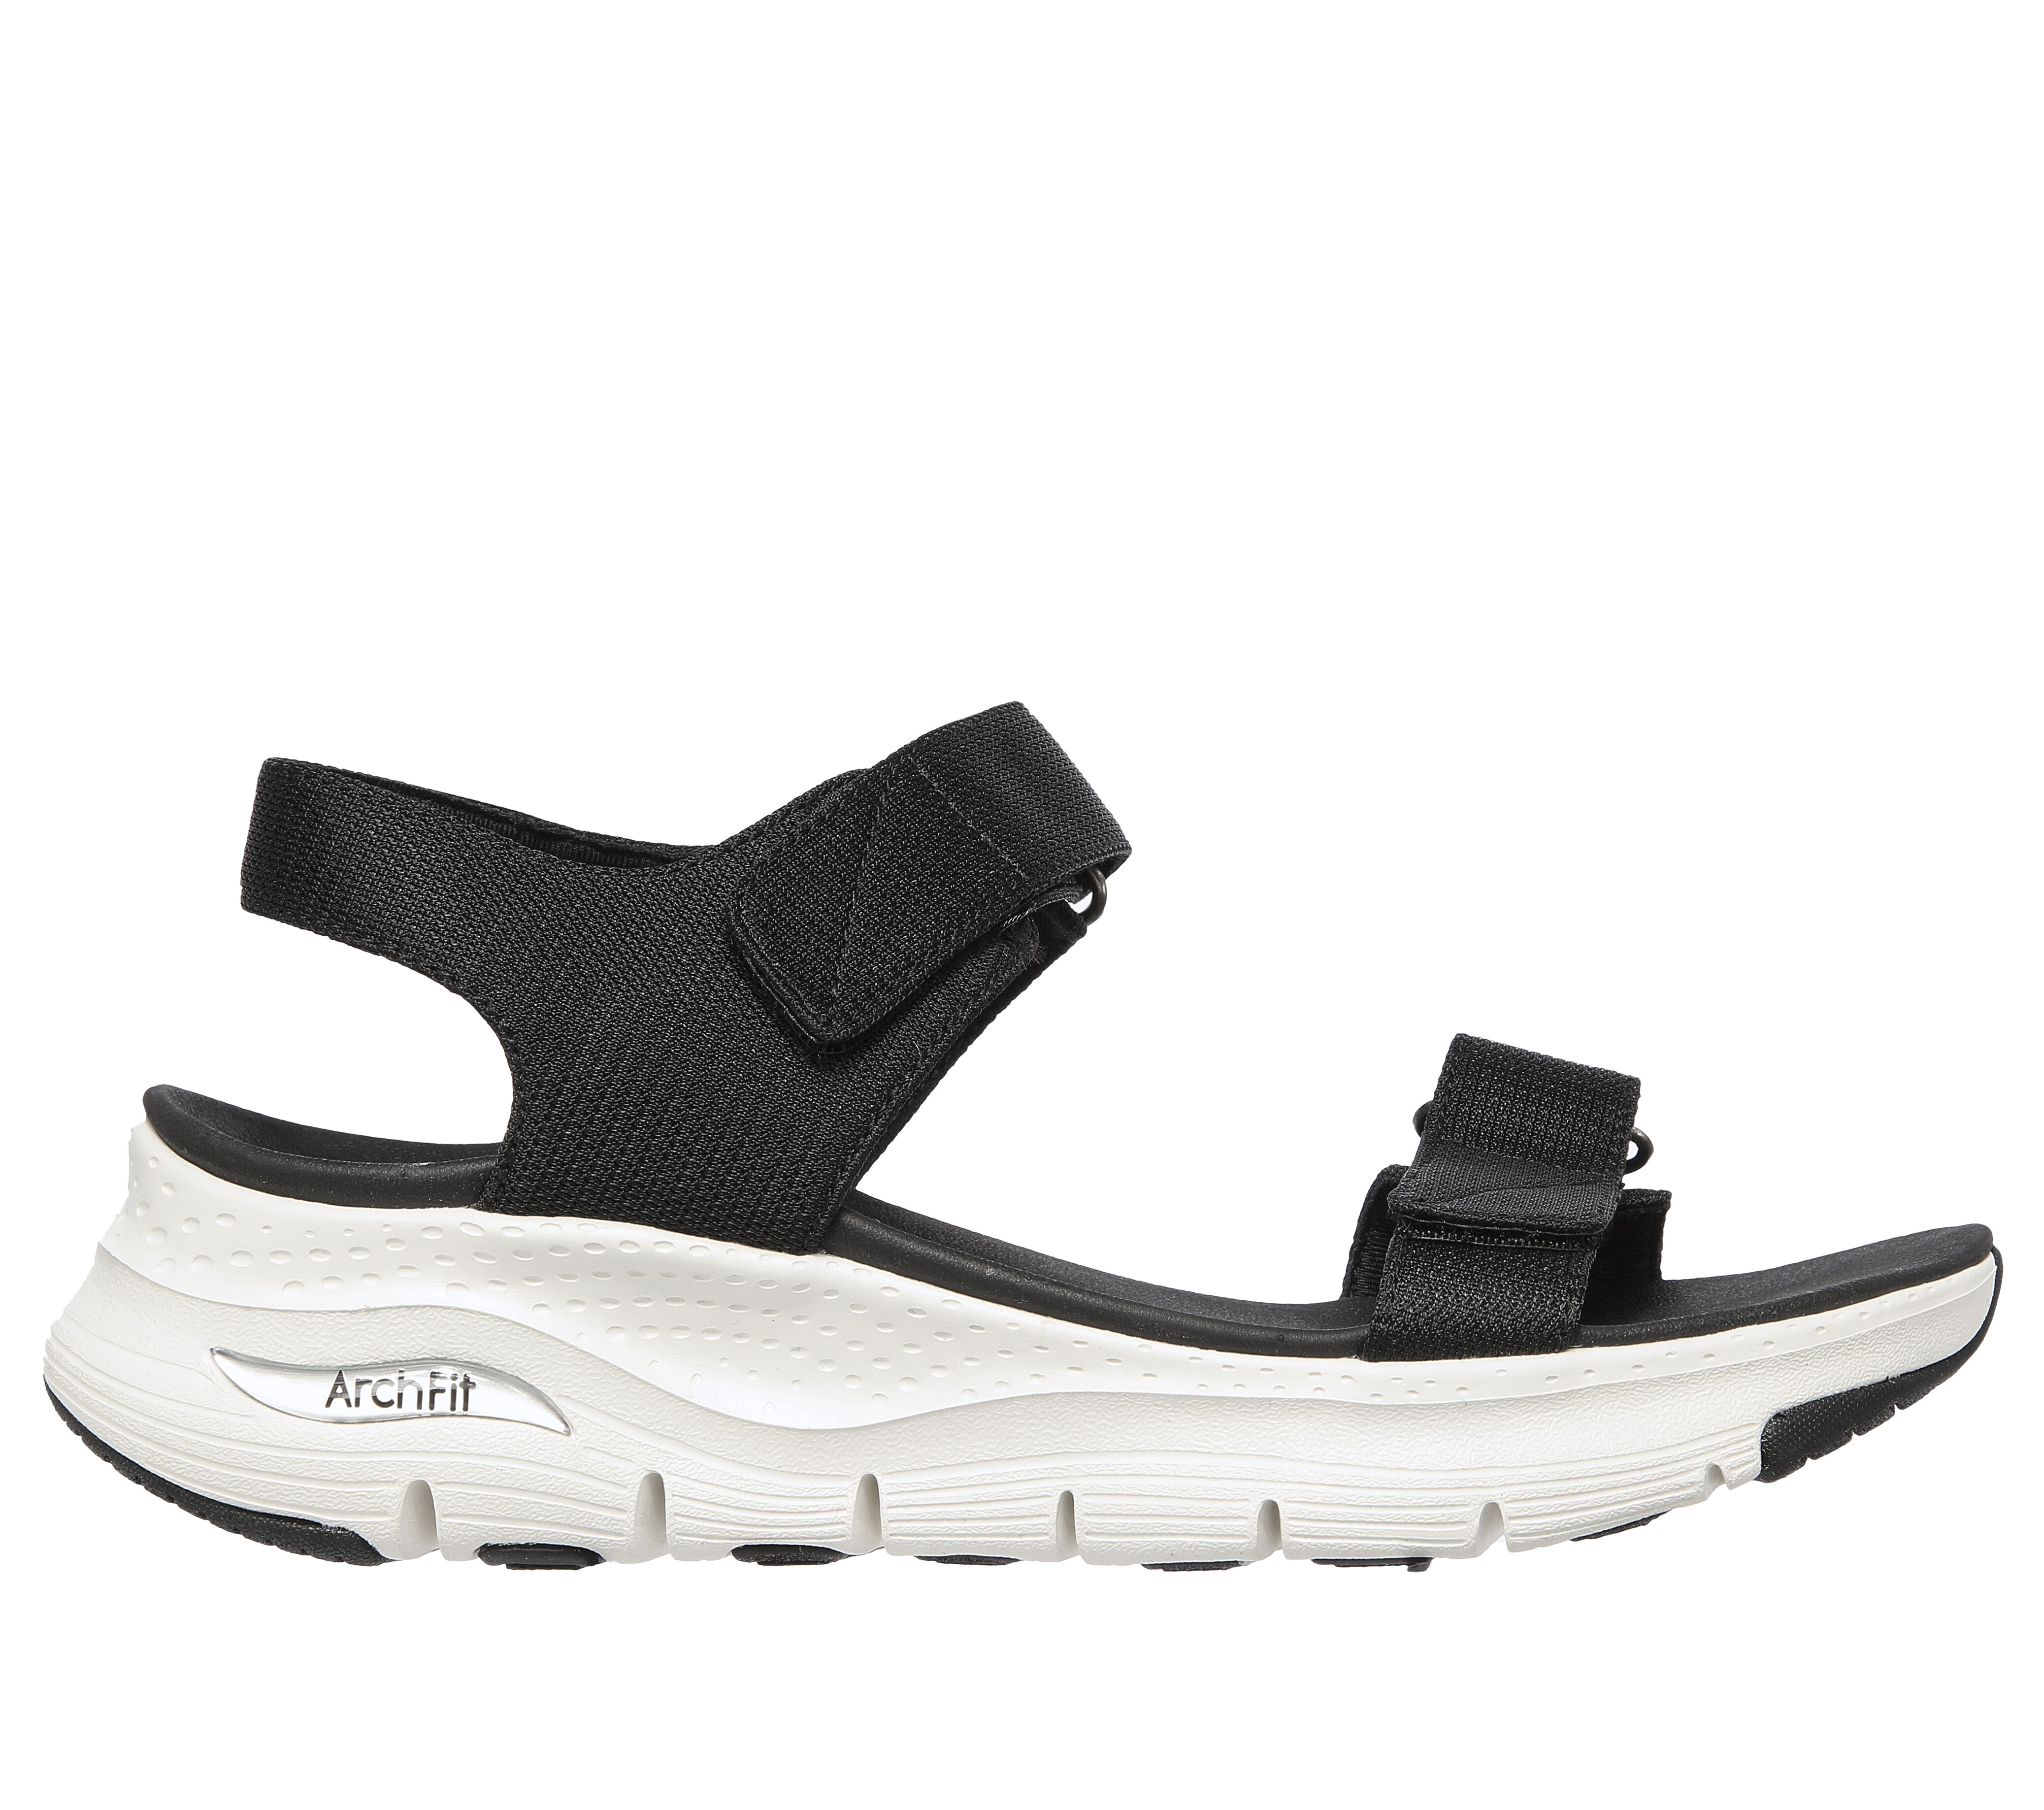 skechers womens sandals clearance